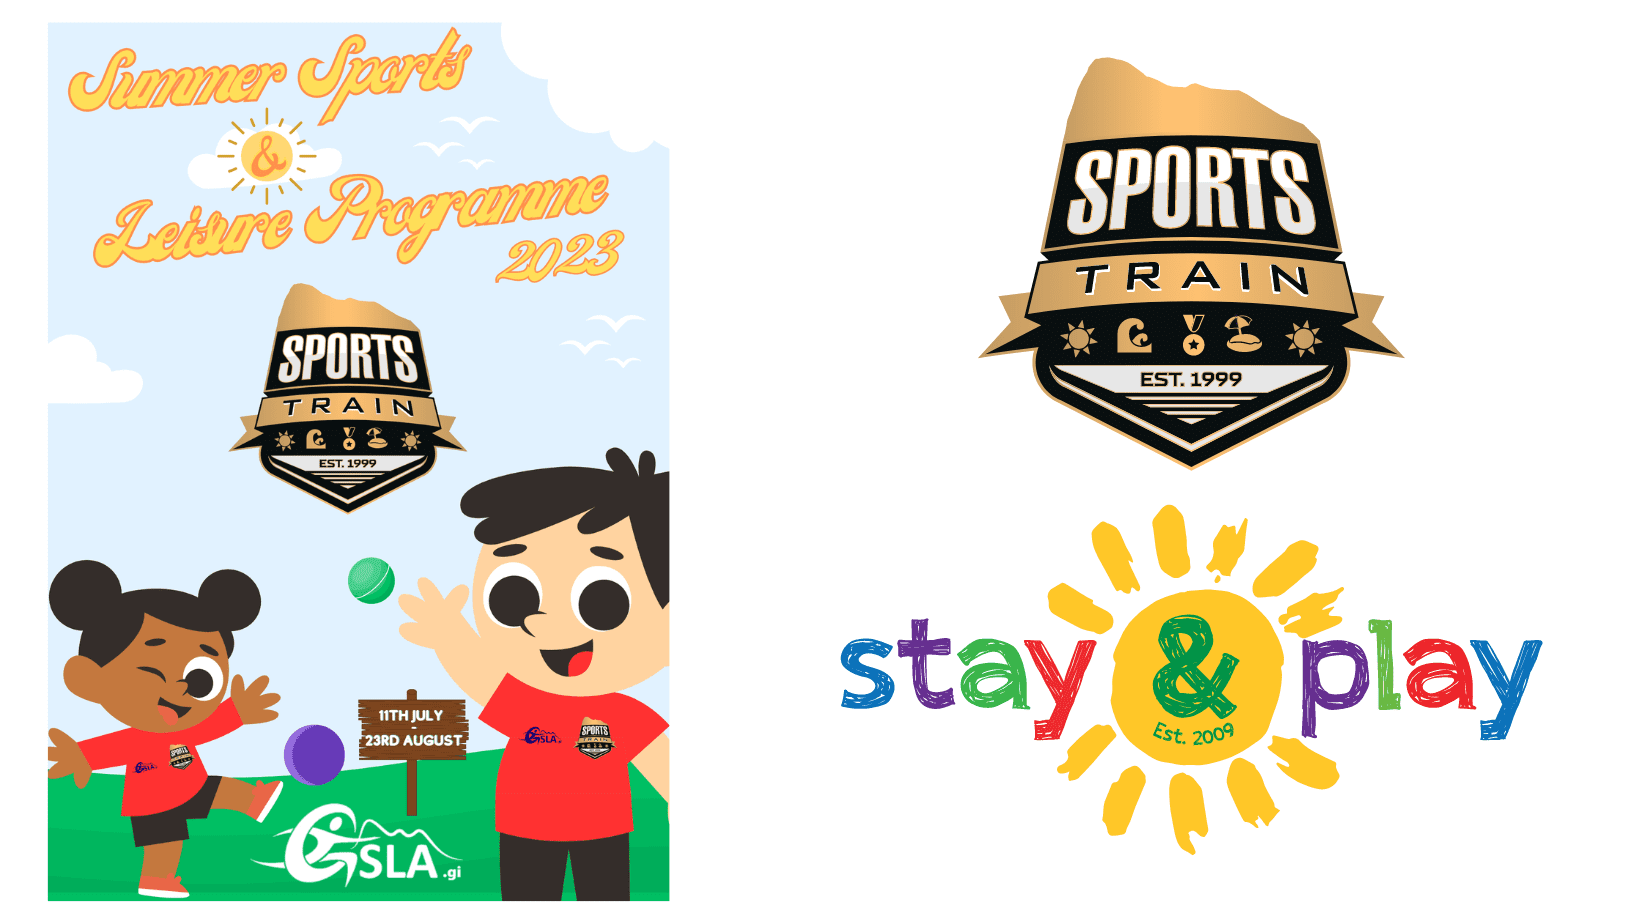 GSLA’s Sports Train and Stay Play Programmes get new look.